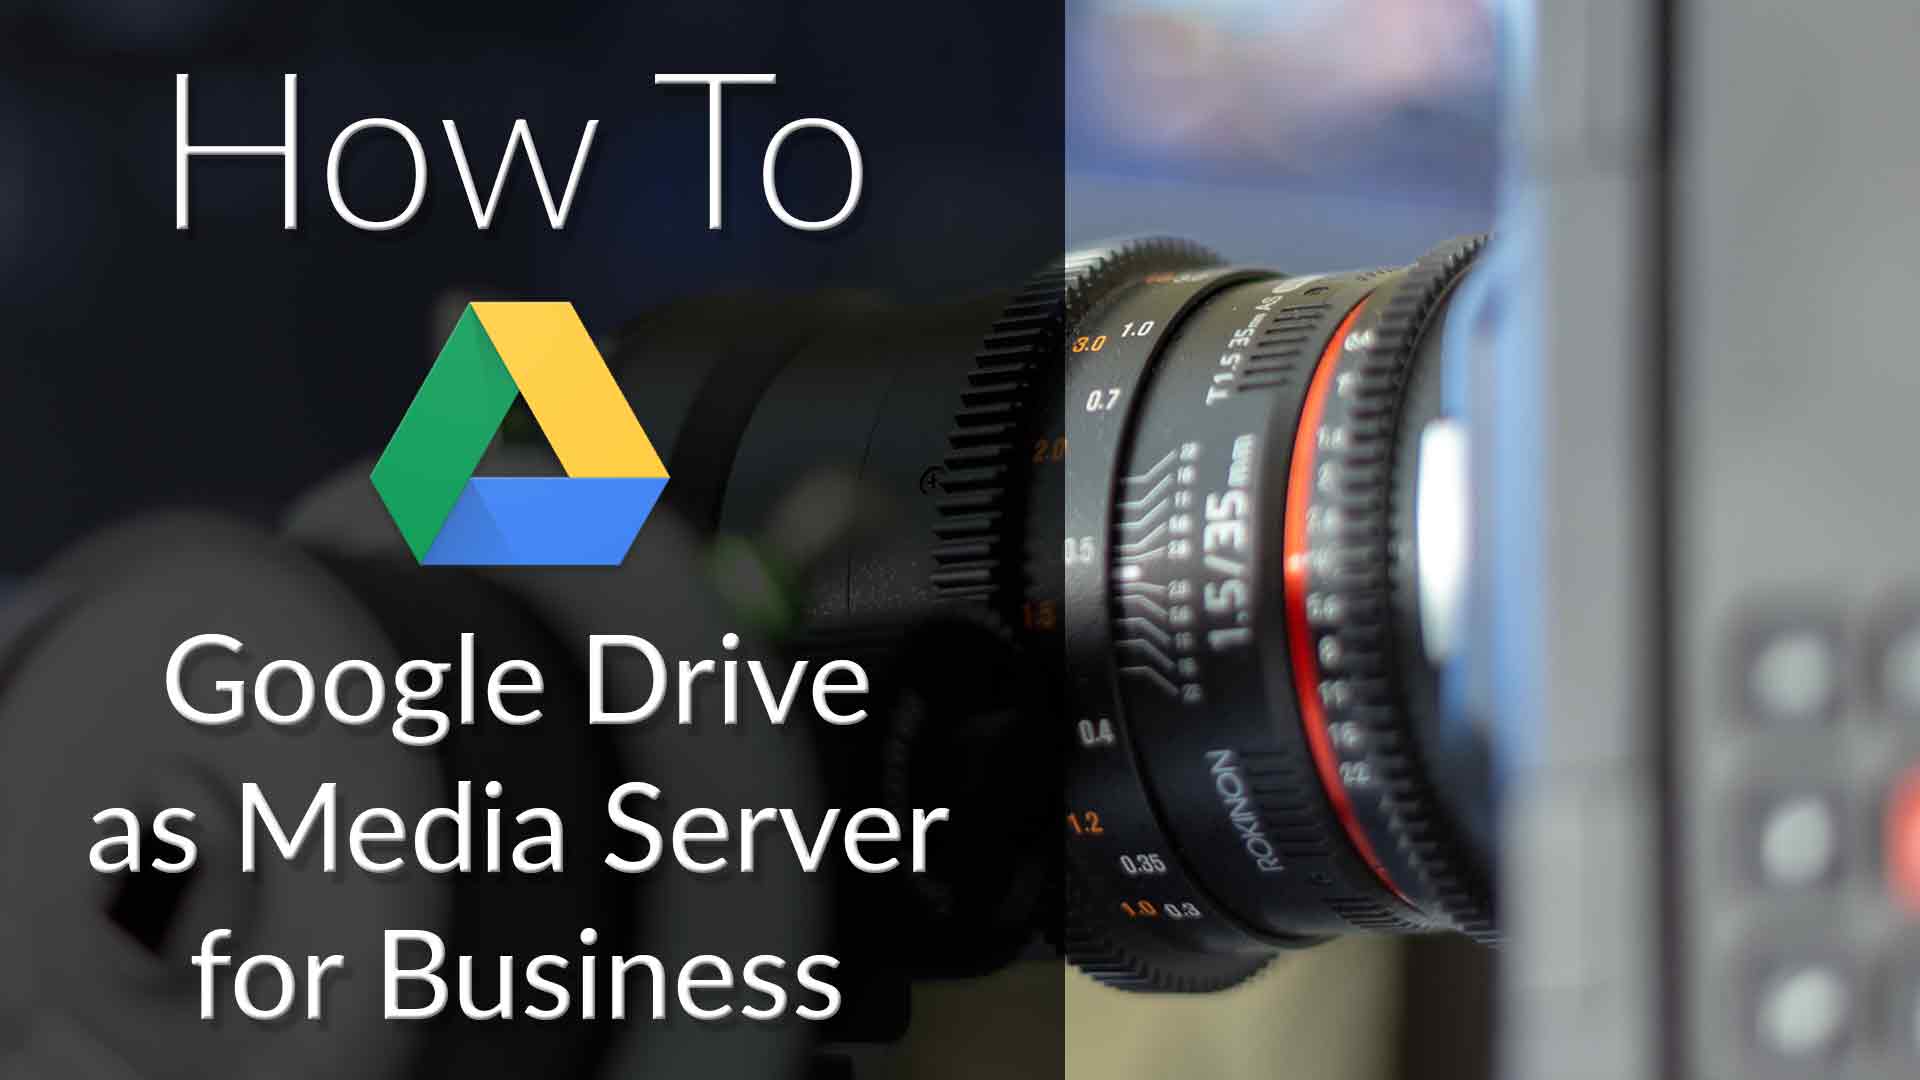 How to Use Google Drive as a Media Server for Business